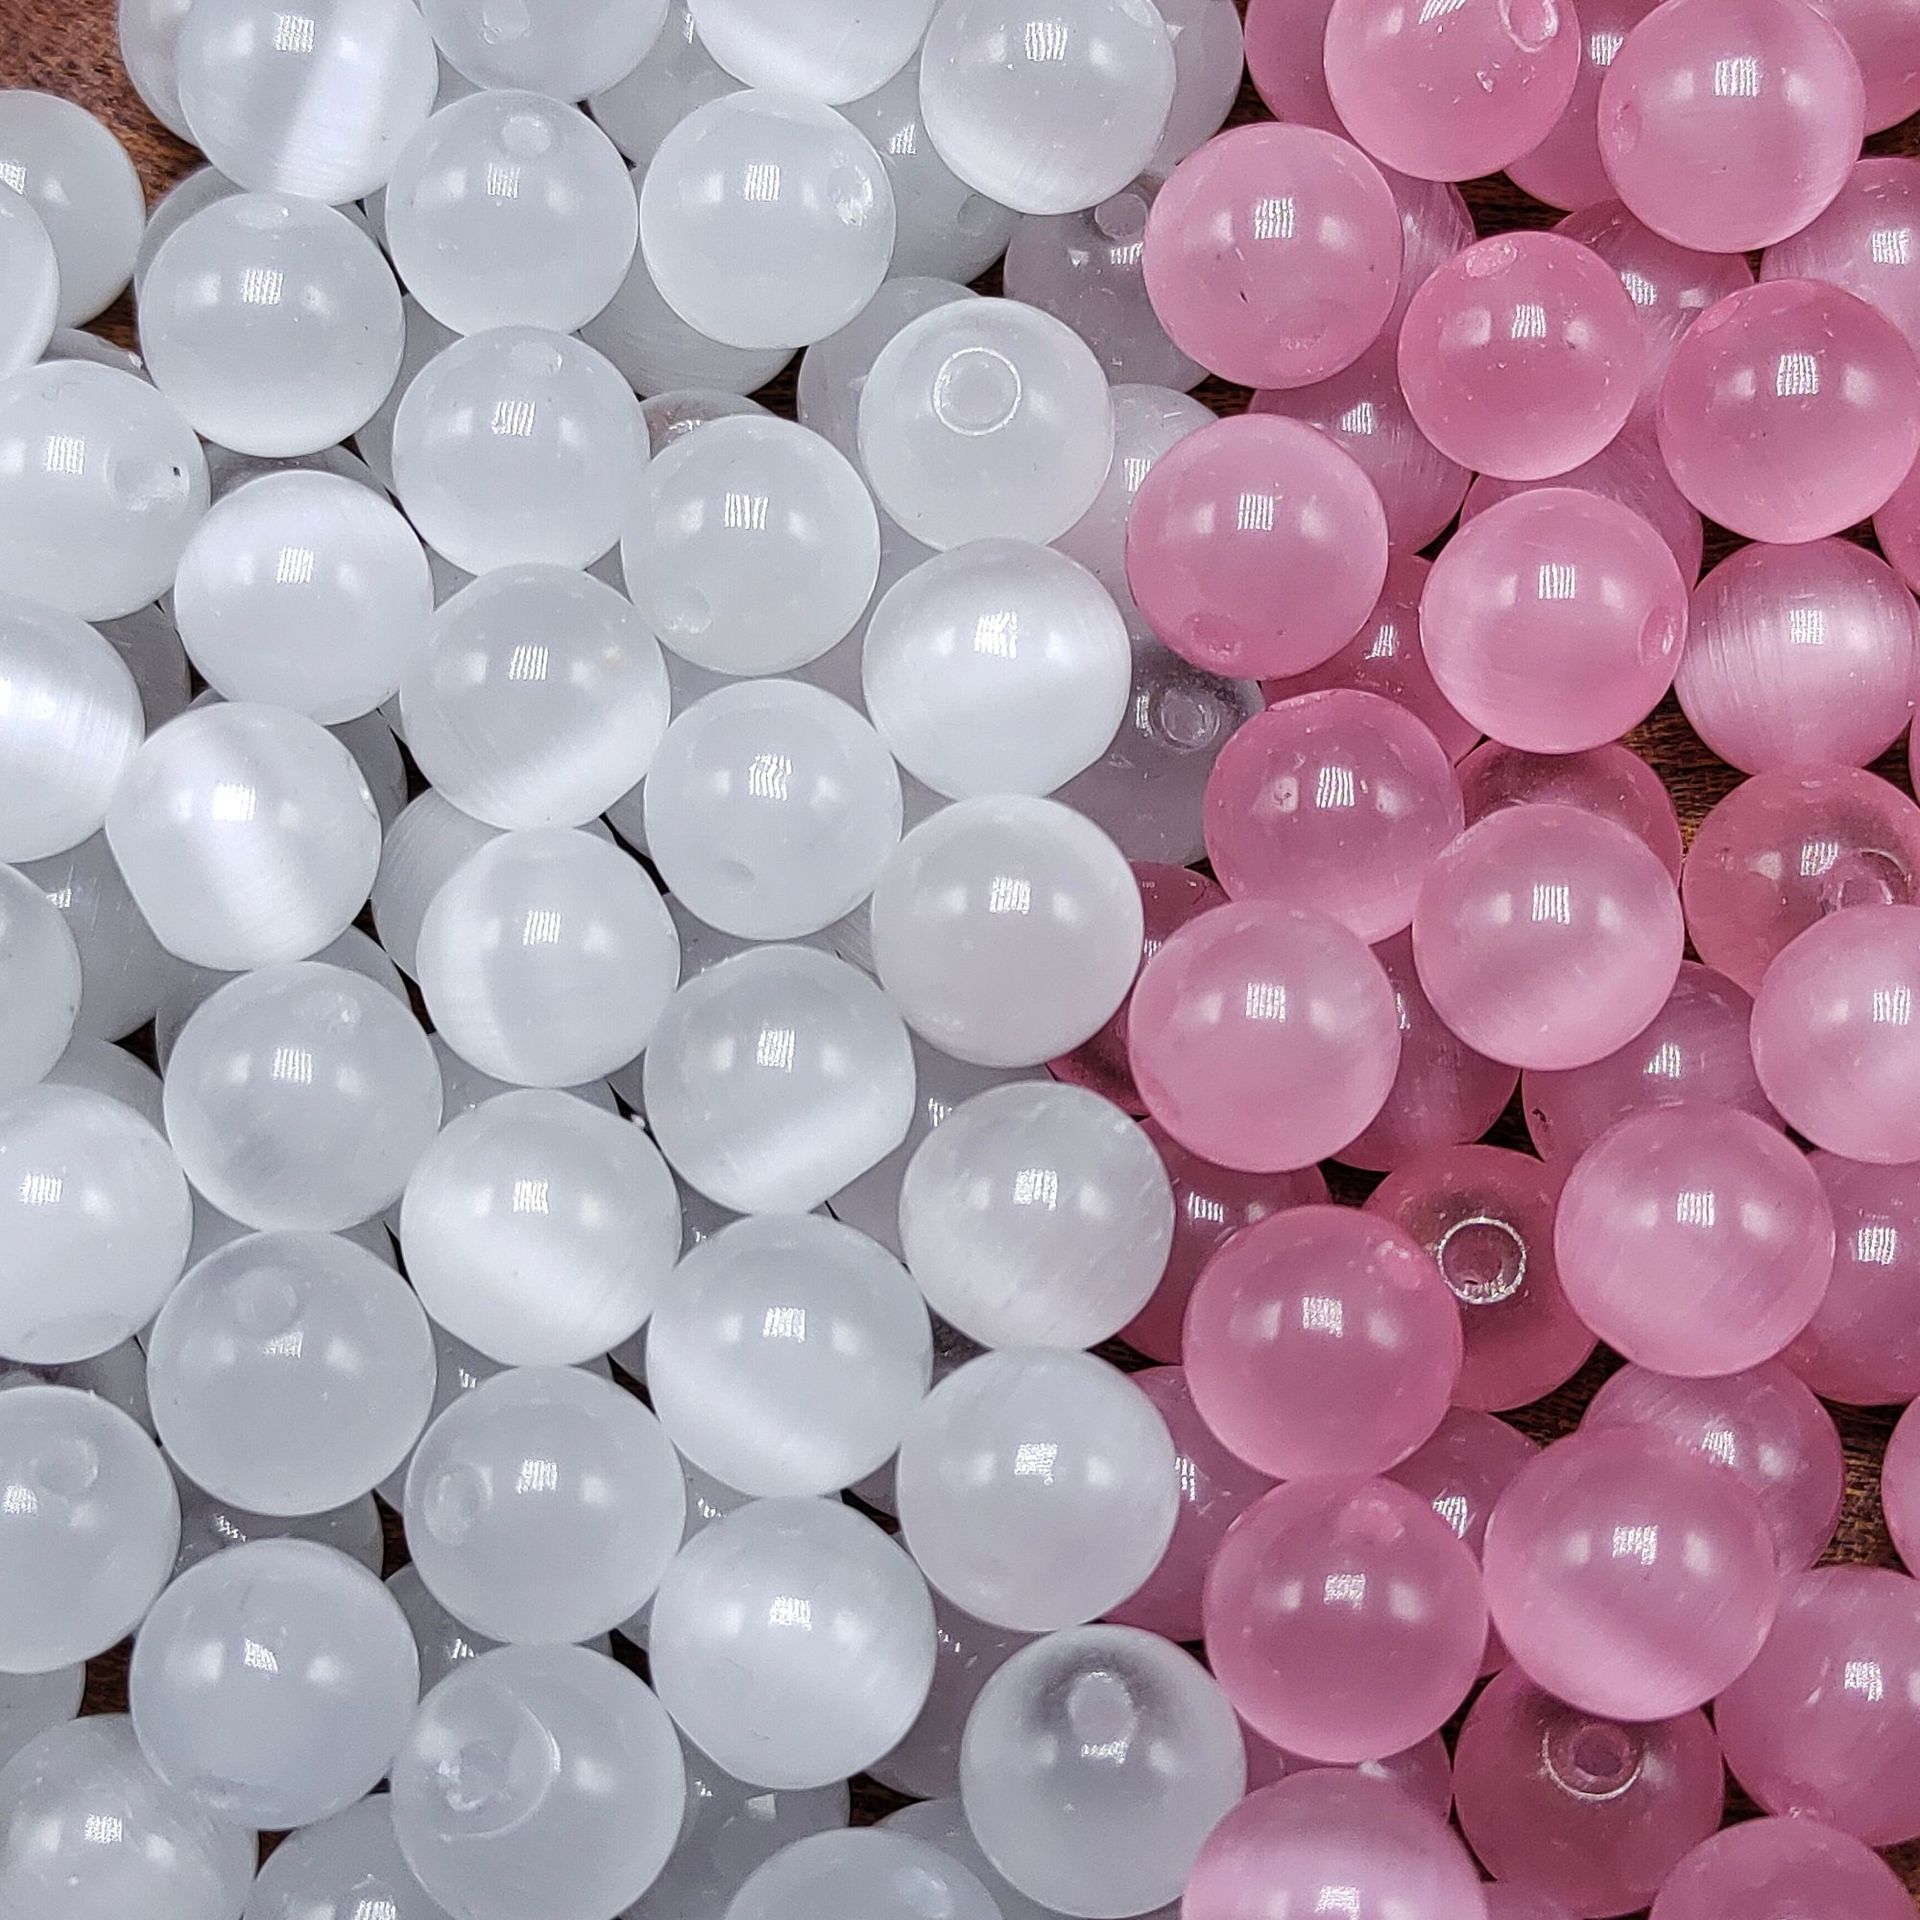 factory wholesale white pink cat eye loose round beads diy handmade necklace bracelet beads accessories spacer beads